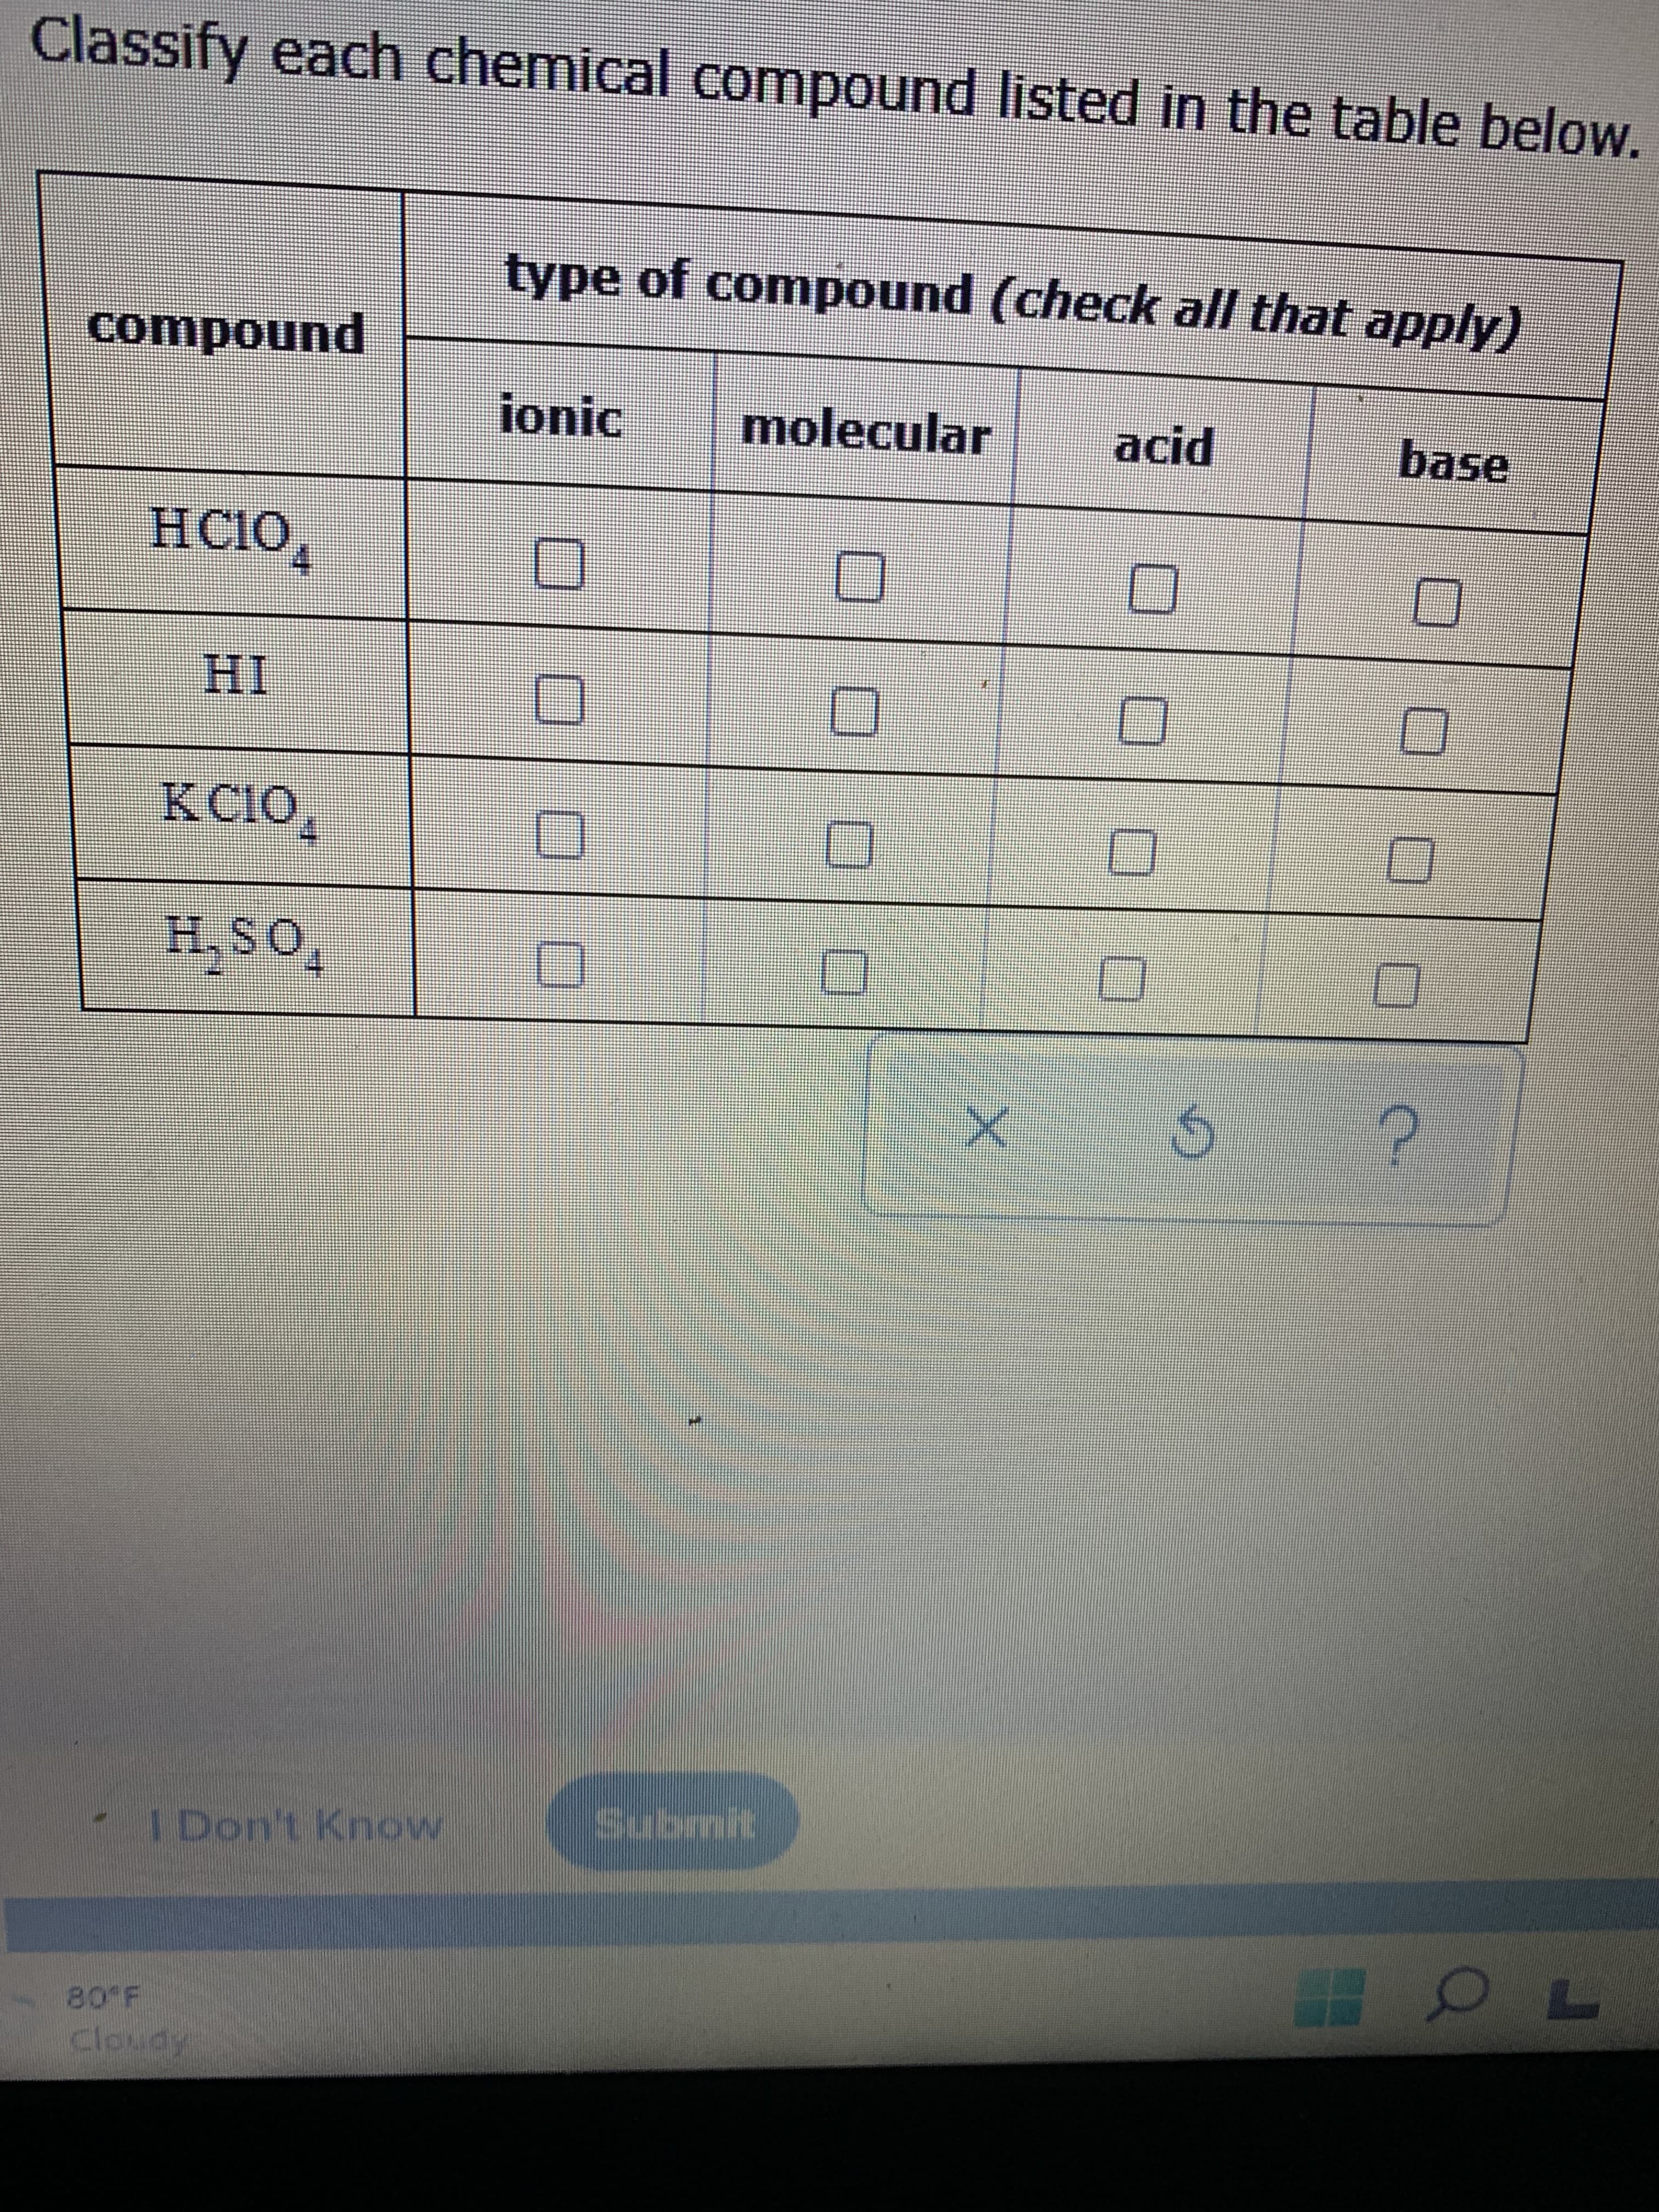 Classify each chemical compound listed in the table below.
type of compound (check all that apply)
punoduwoɔ
ionic
molecular
base
HCIO,
IH
KC10,
H.
Submit
I Don't Know
Cloudy
